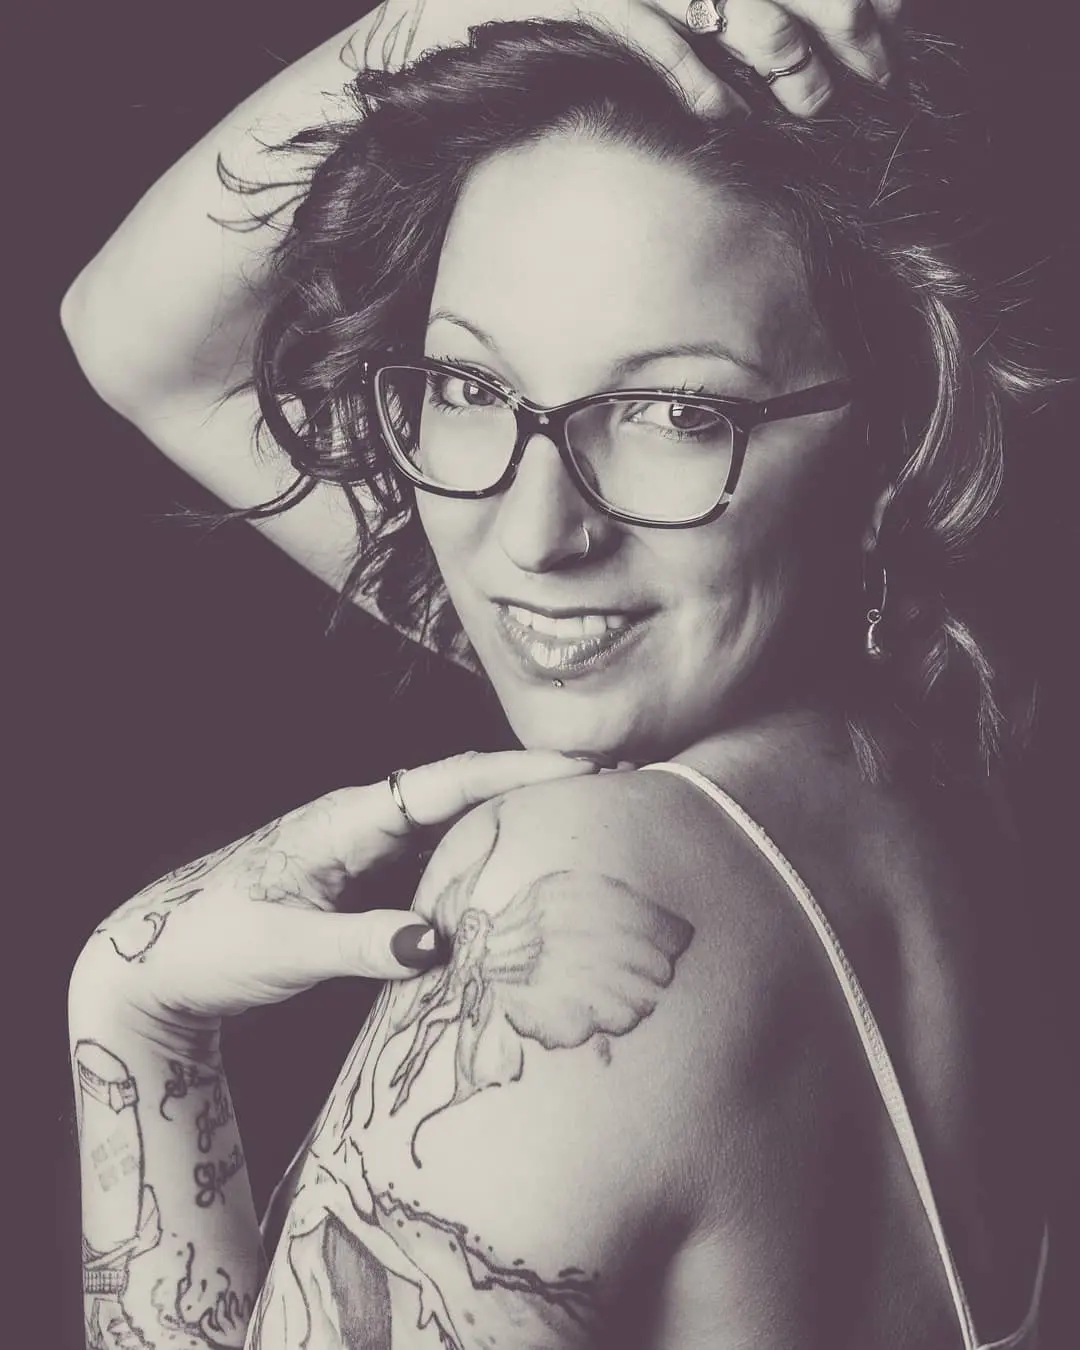 A woman with glasses and tattoos on her arms.